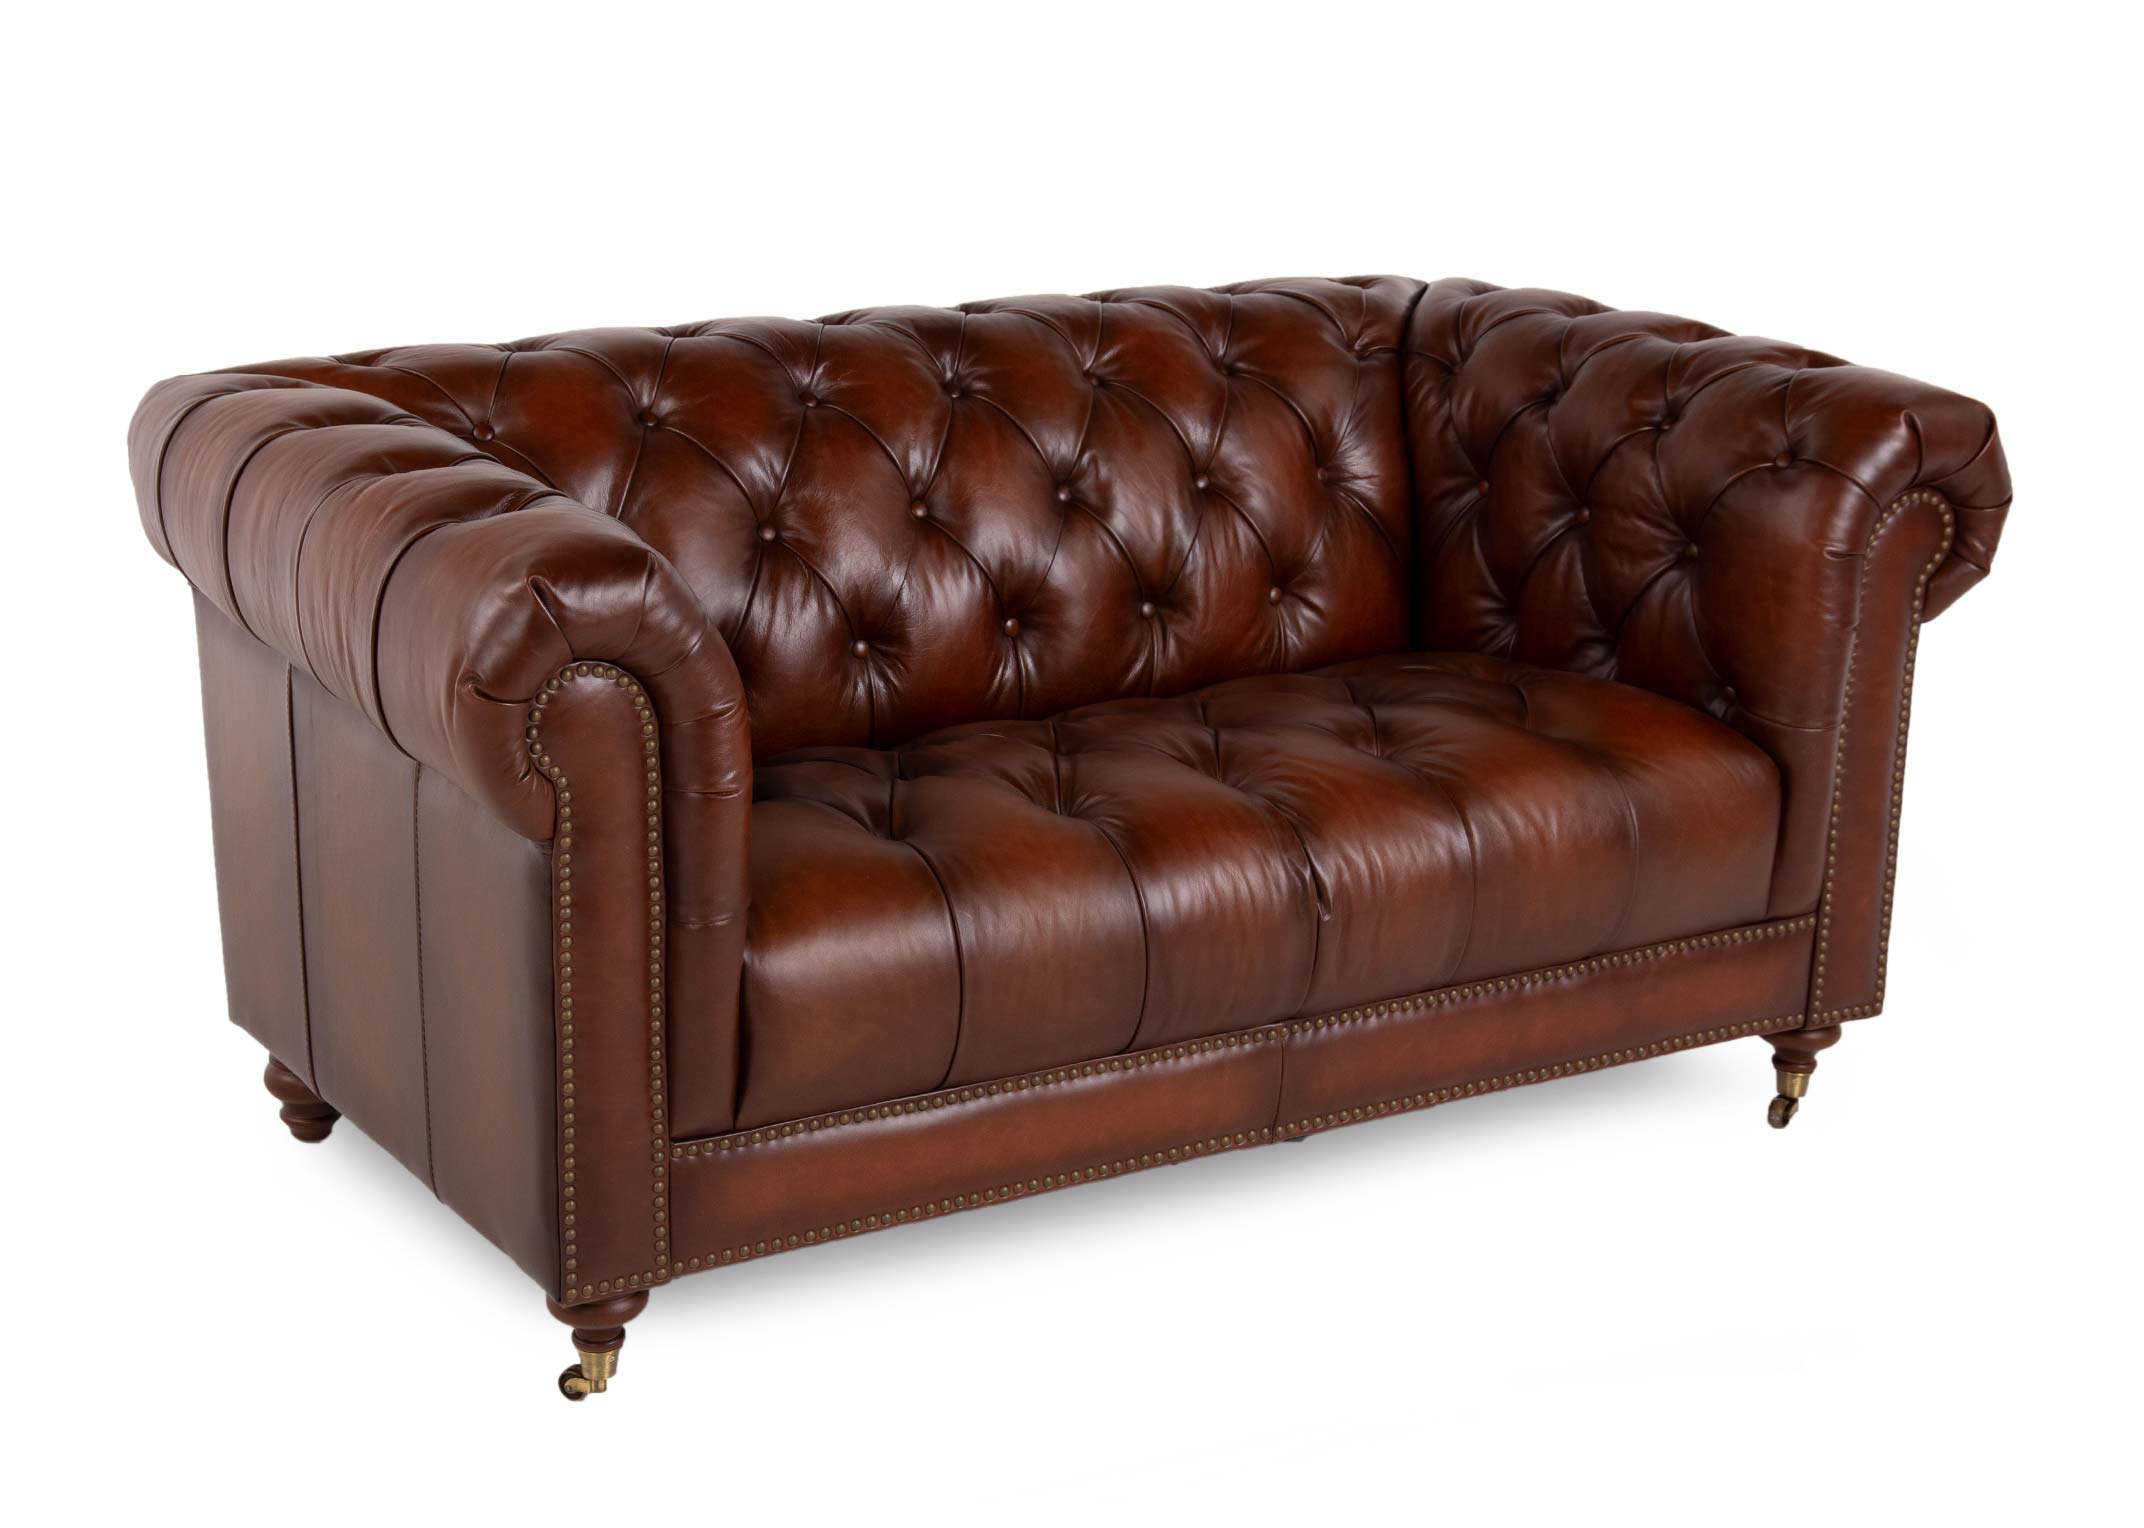 2 Seater Vintage Brown Leather Sofa